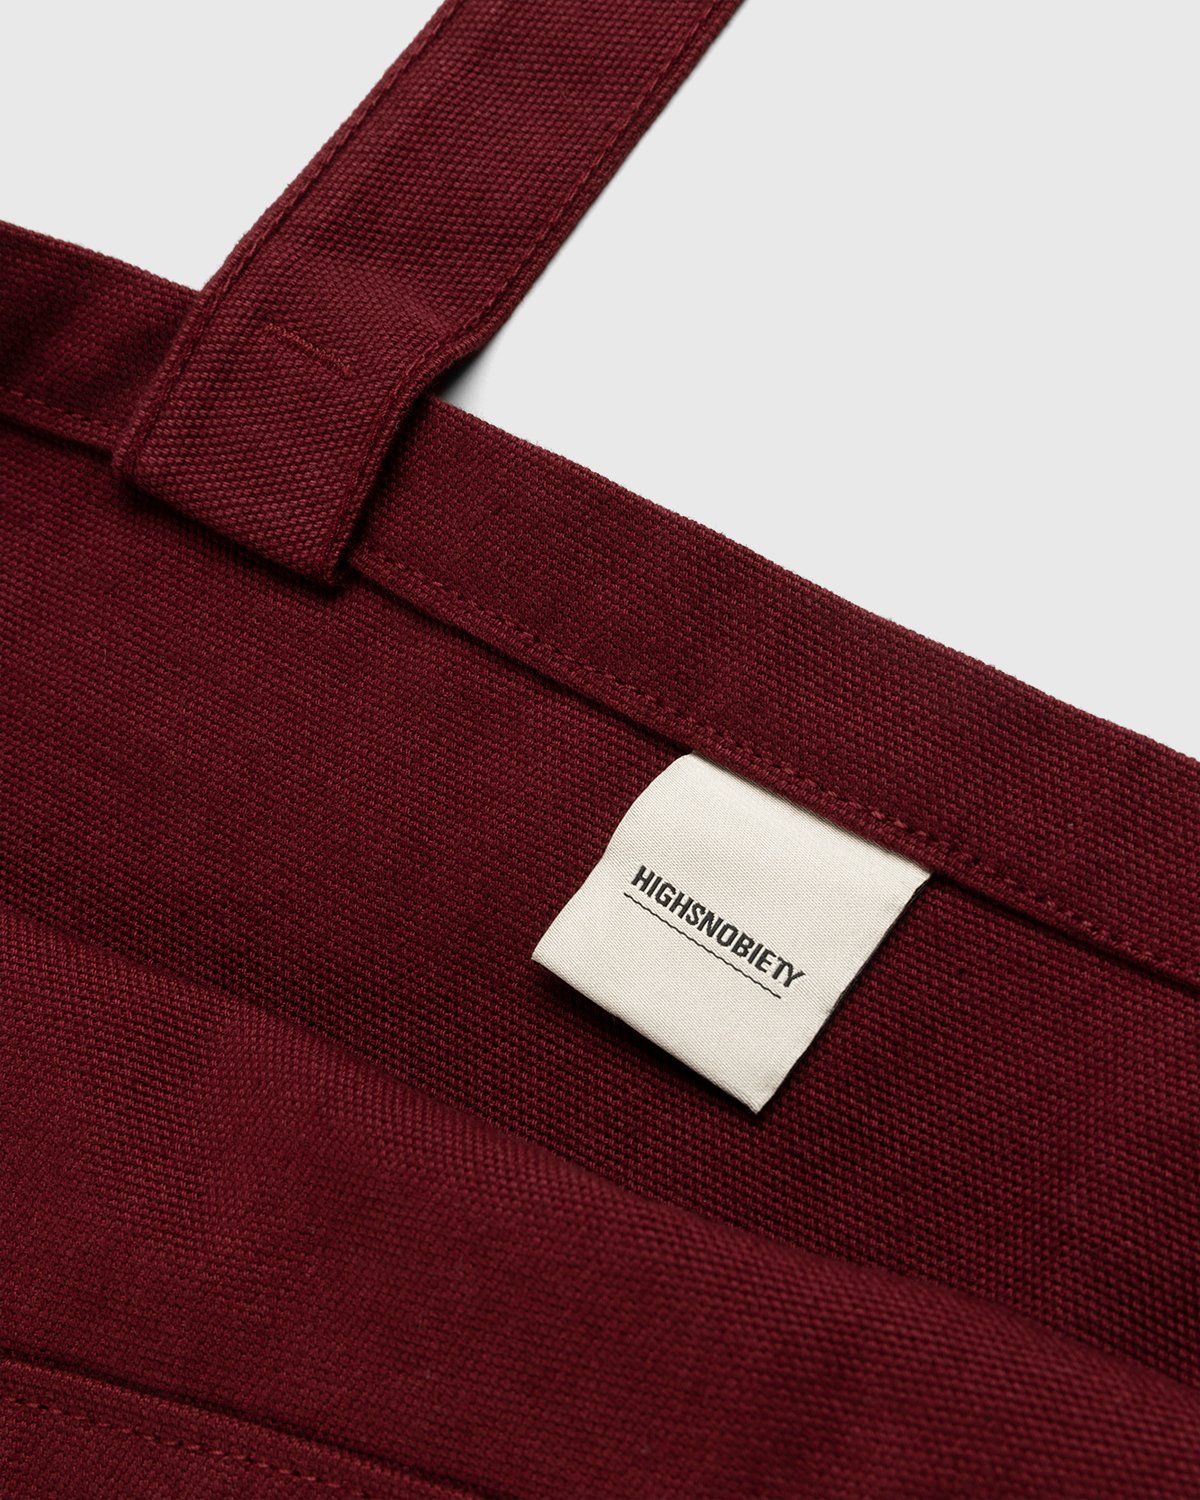 Highsnobiety – HS Sports Logo Tote Bag Bordeaux - Tote Bags - Red - Image 3